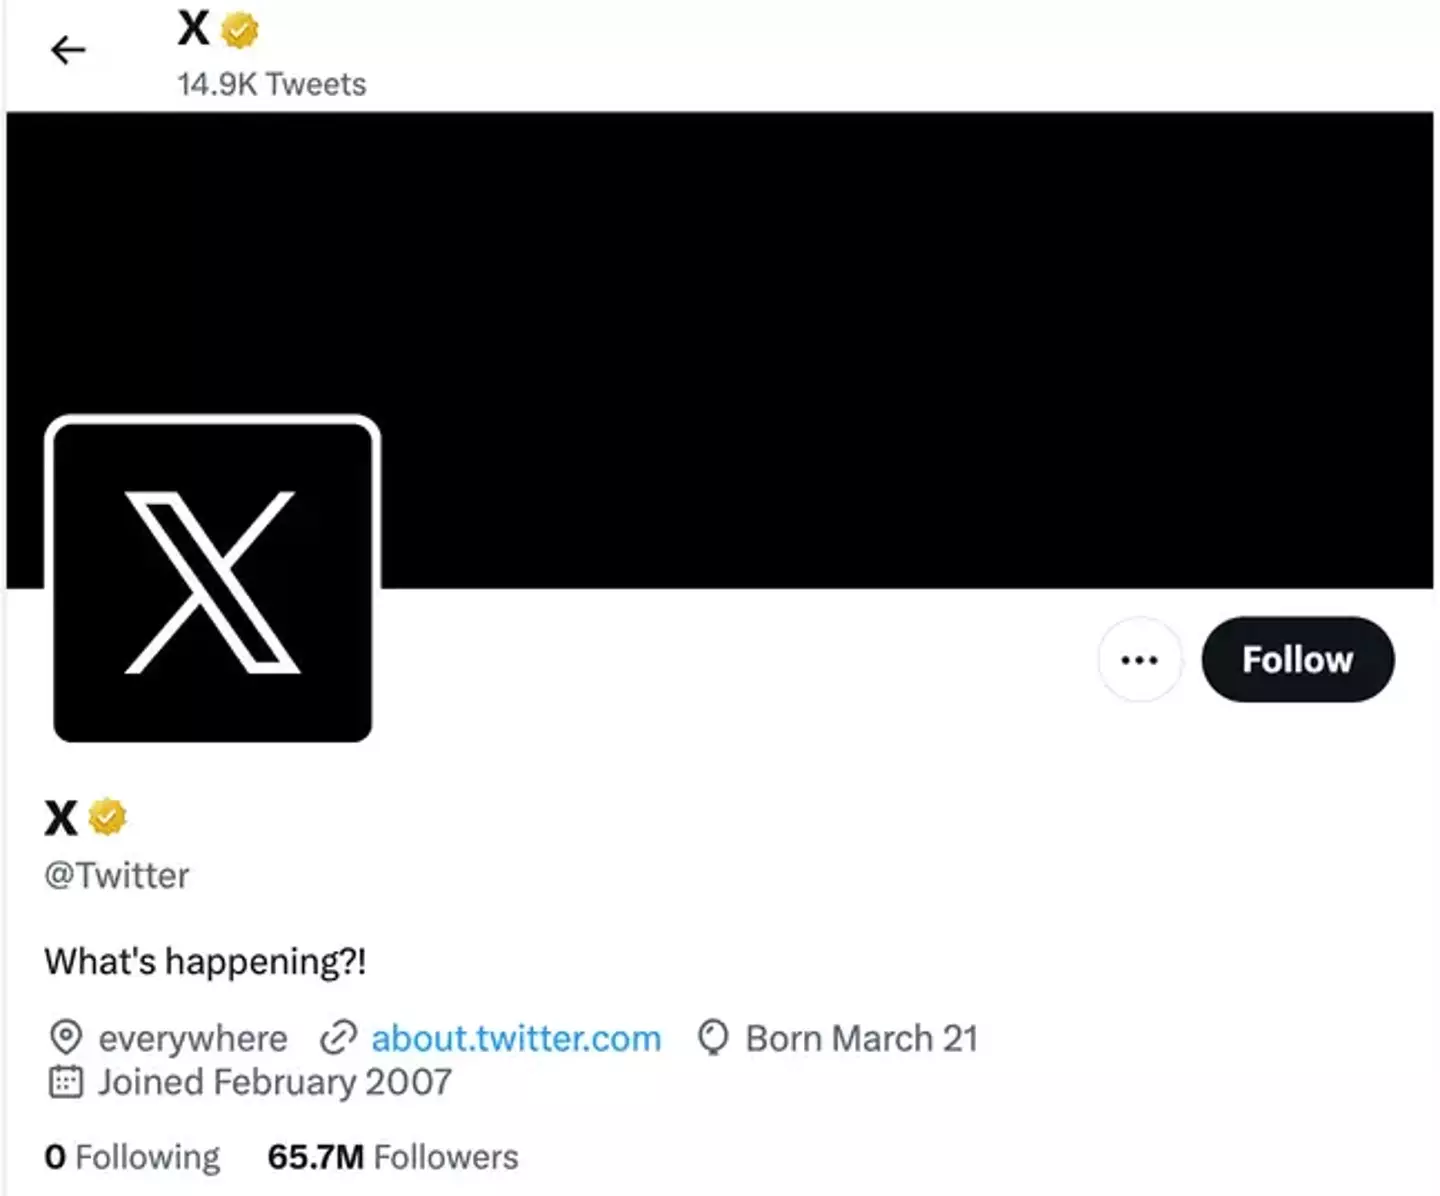 Twitter has changed its logo - saying goodbye to the bird and replacing it with a large X.